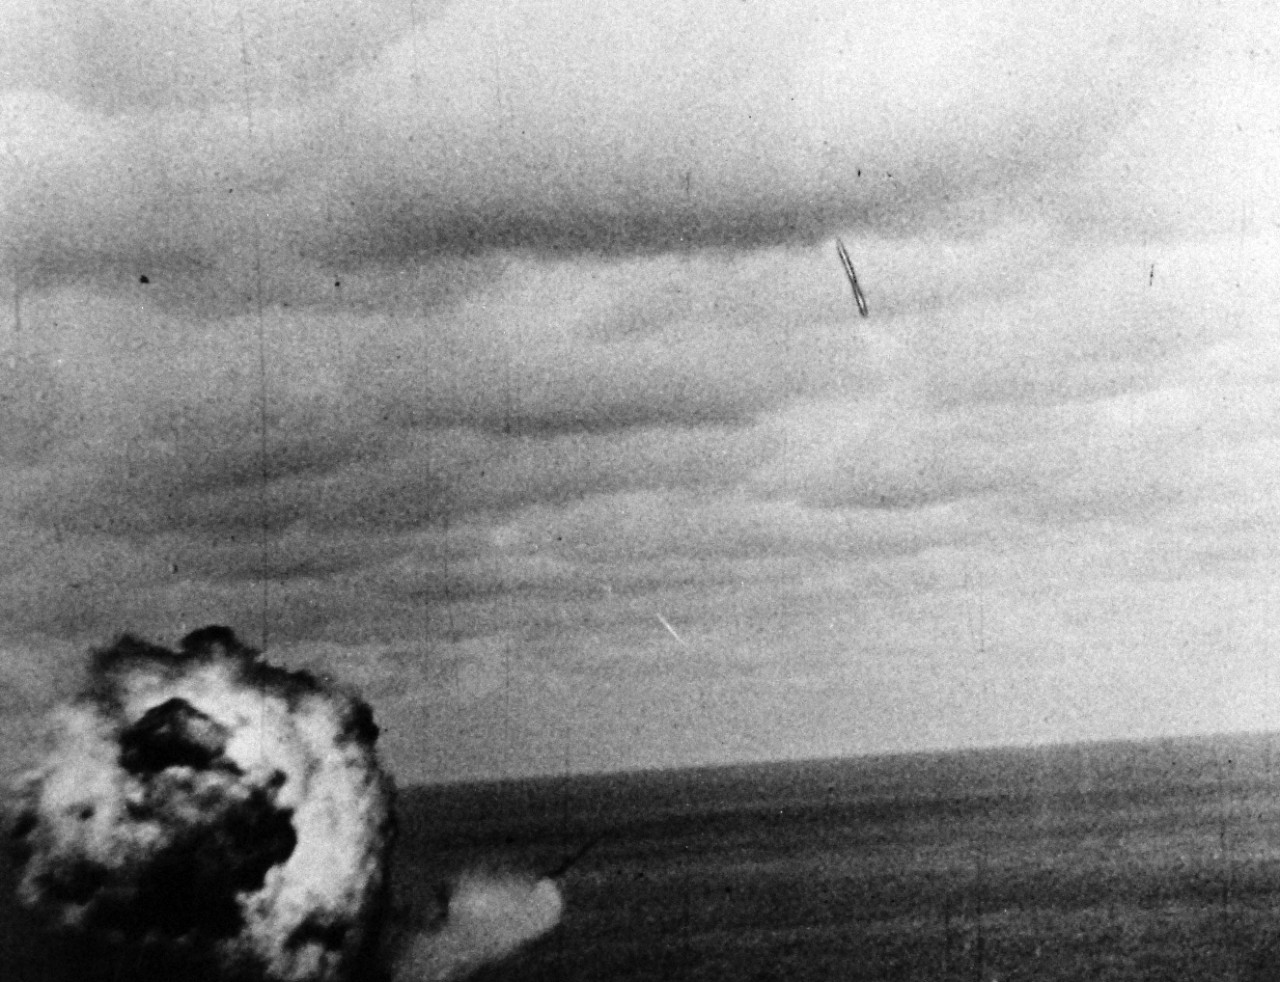 80-G-49692: Japanese Kamikaze Attack, June 1945.  A Japanese suicide plane misses its mark and plunges into the Pacific.  Note the huge mushroom of smoke swells upon surface of the water.     Released June 28, 1945.   Official U.S. Navy photograph, now in the collections of the National Archives.  